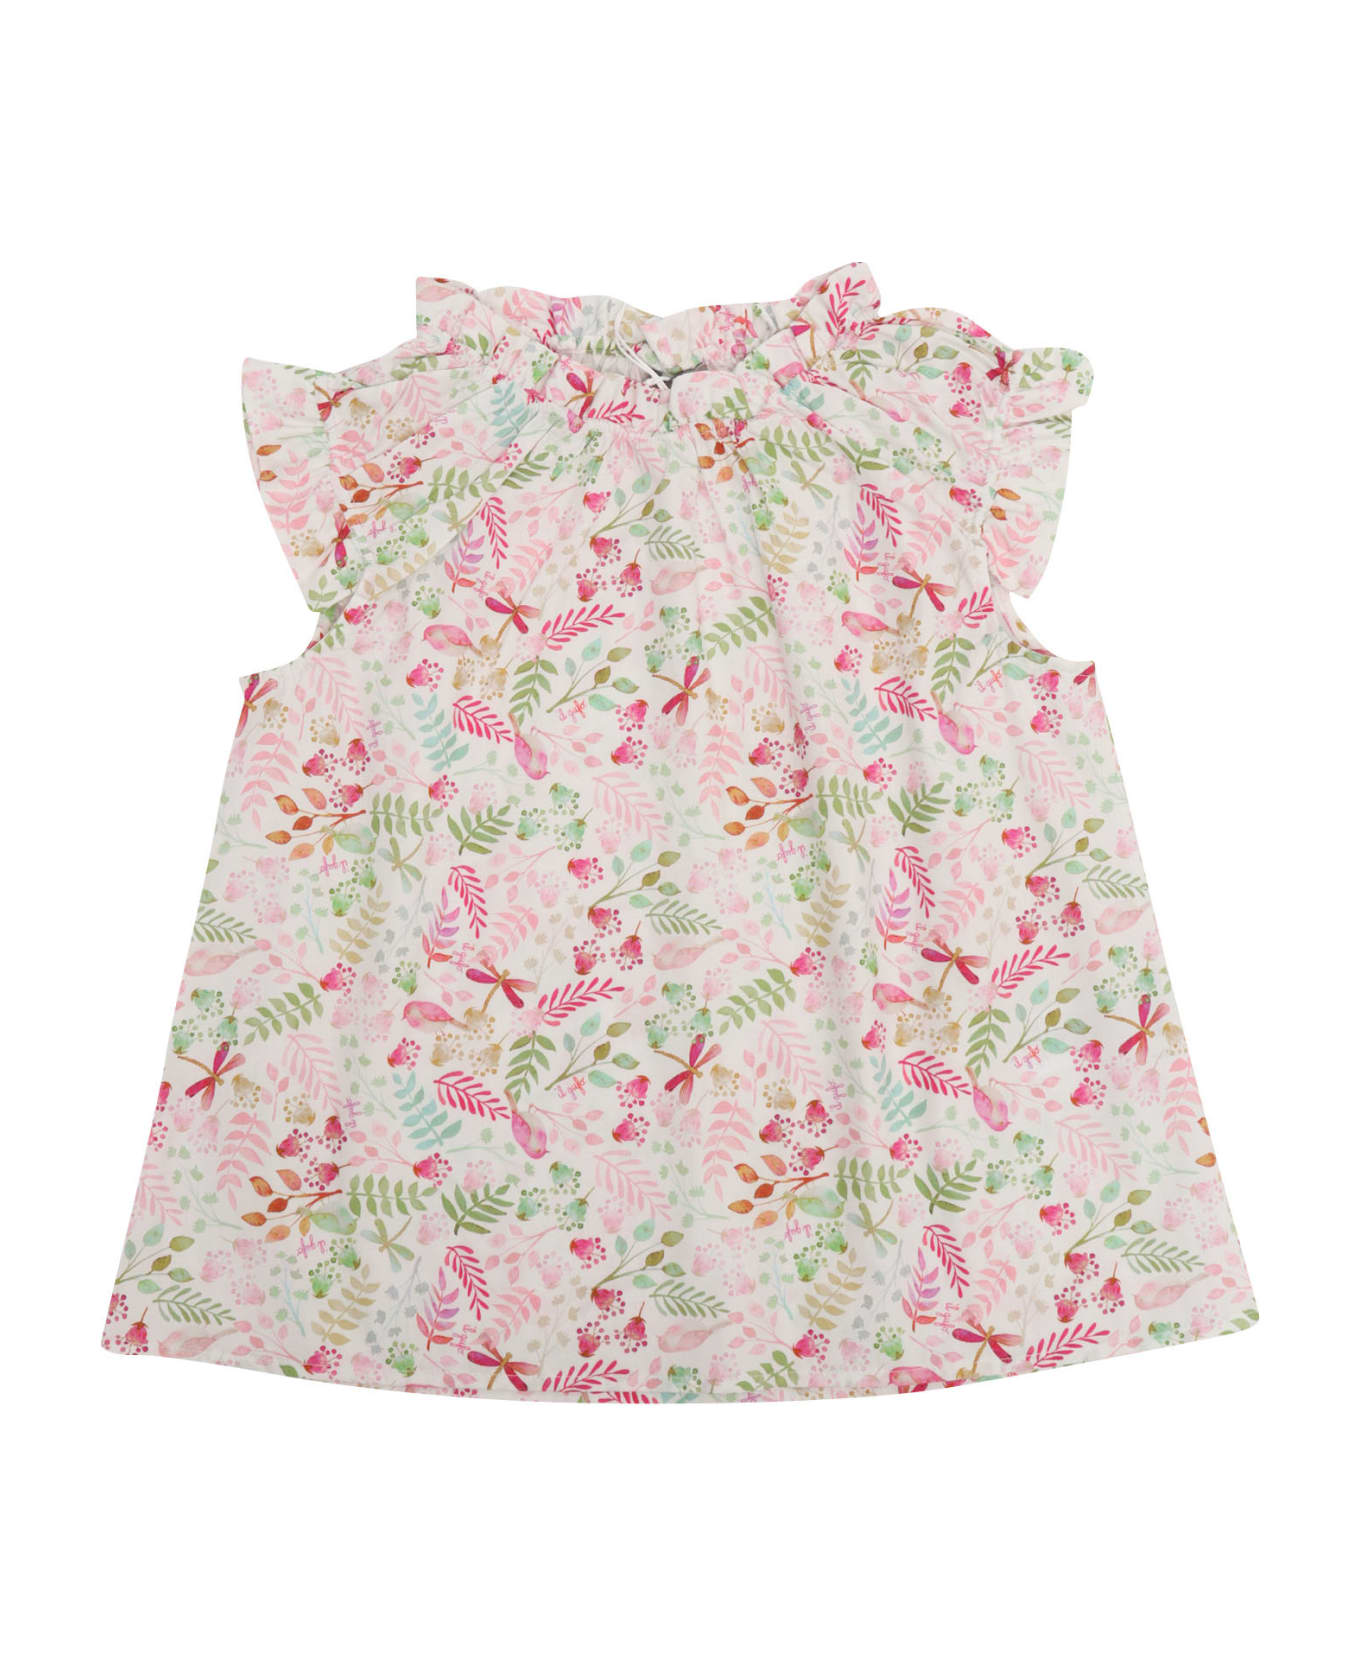 Il Gufo Floral T-shirt For Girls - PINK トップス